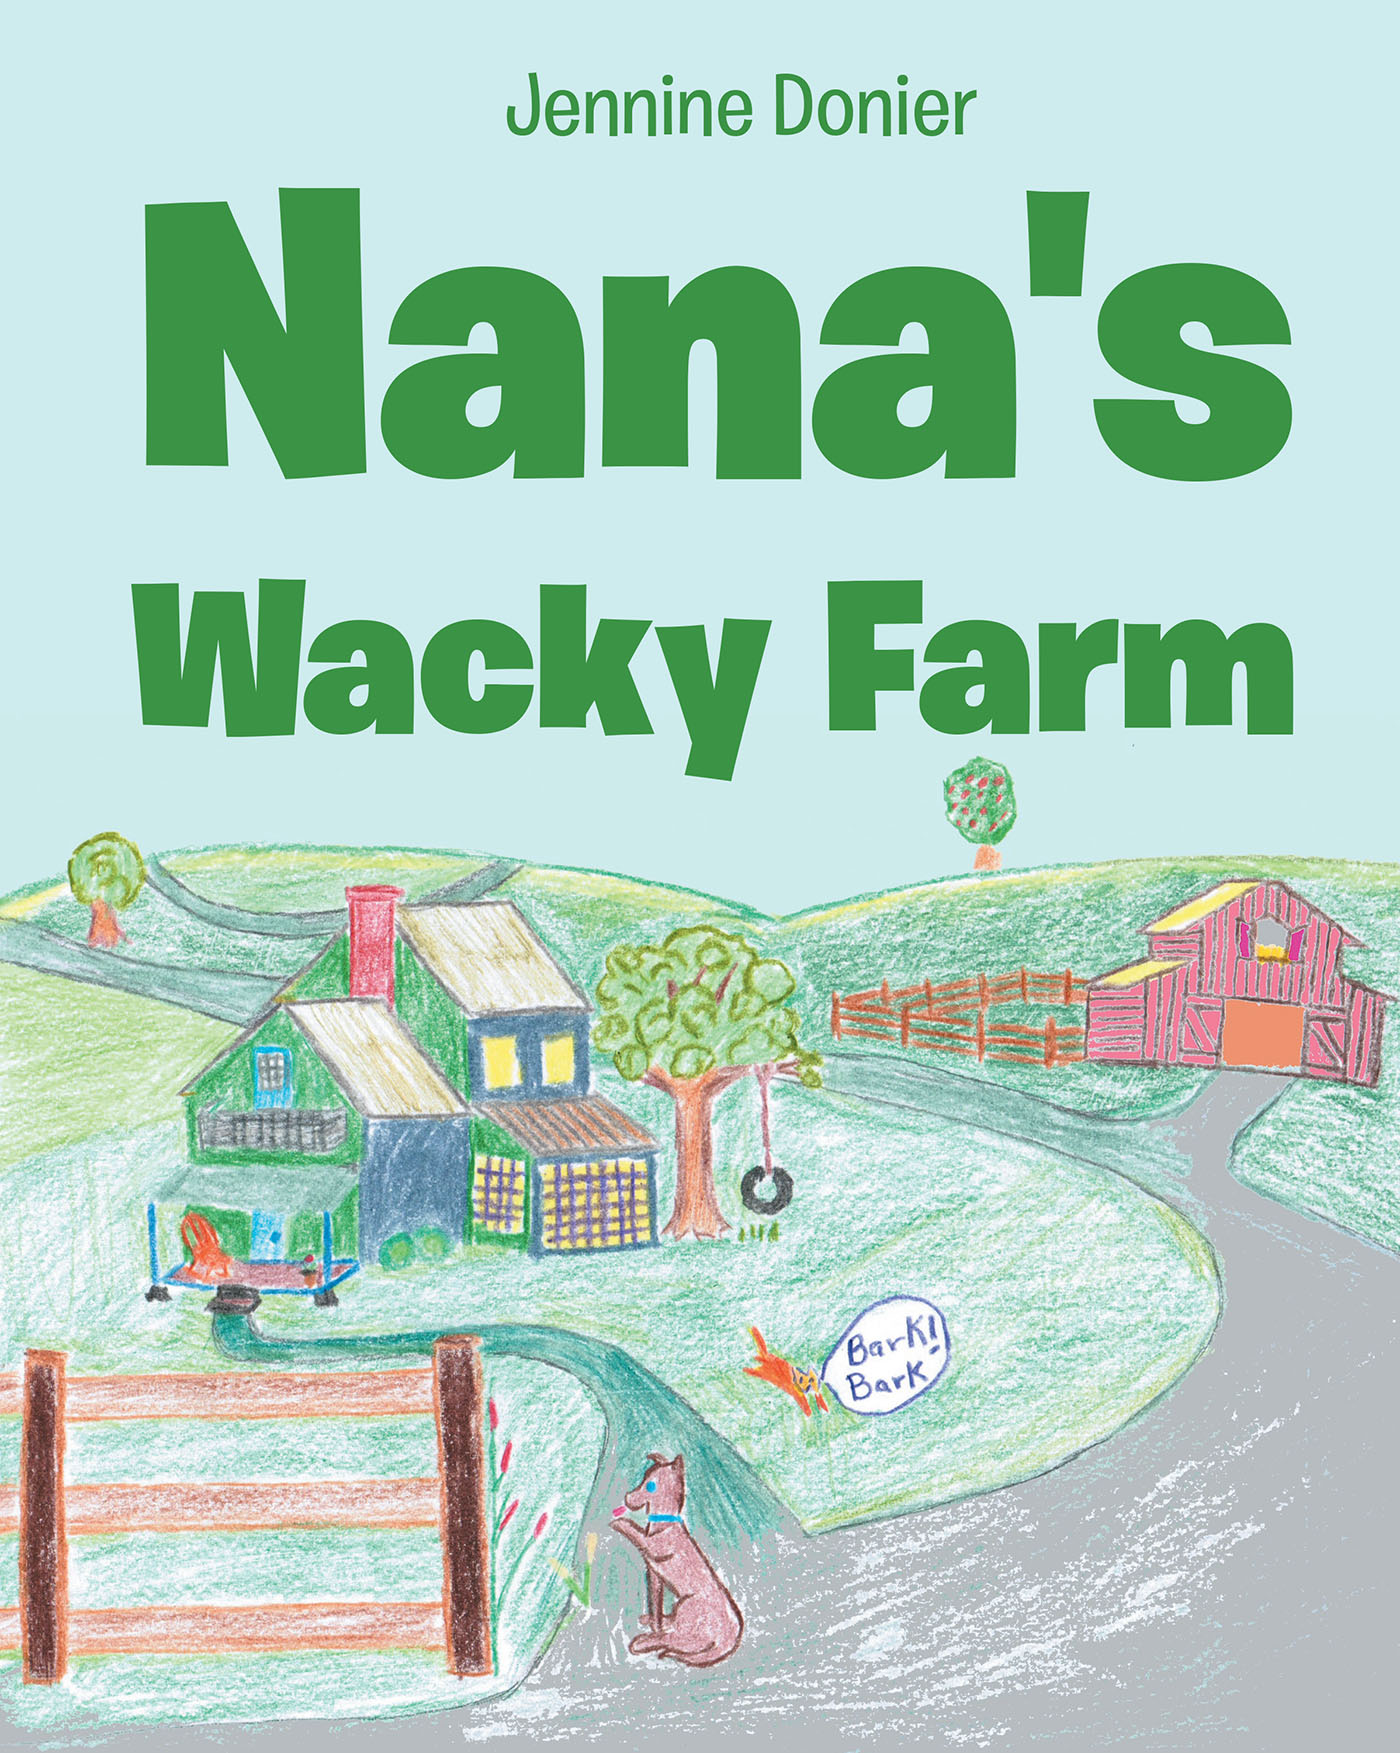 Author Jennine Donier’s New Book, “Nana’s Wacky Farm,” is a Charming Children’s Story Following Four Cousins on a Topsy-Turvy Visit to Their Grandmother’s Place